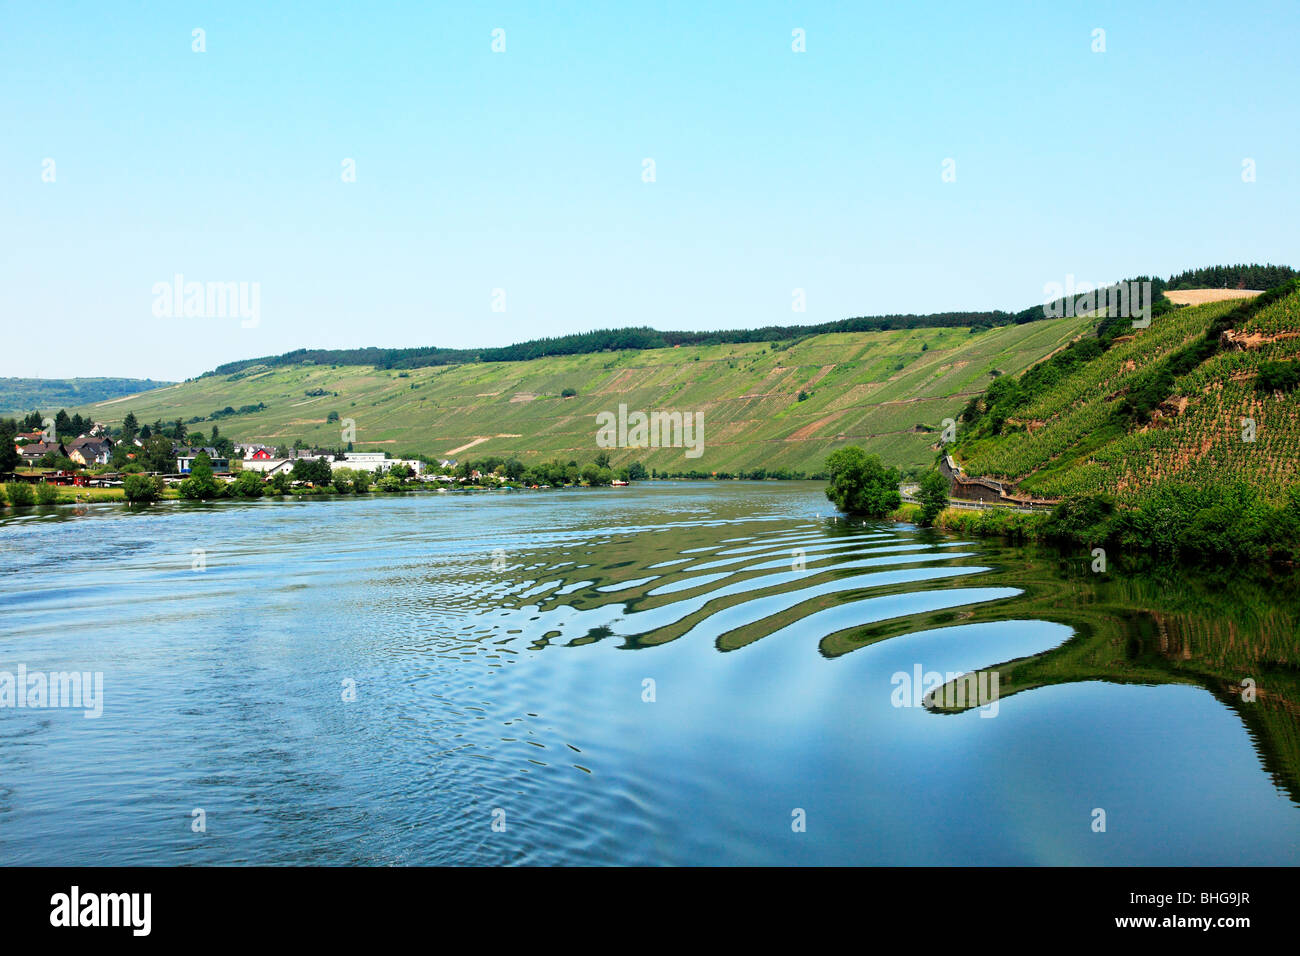 The rhine and riverbanks Stock Photo